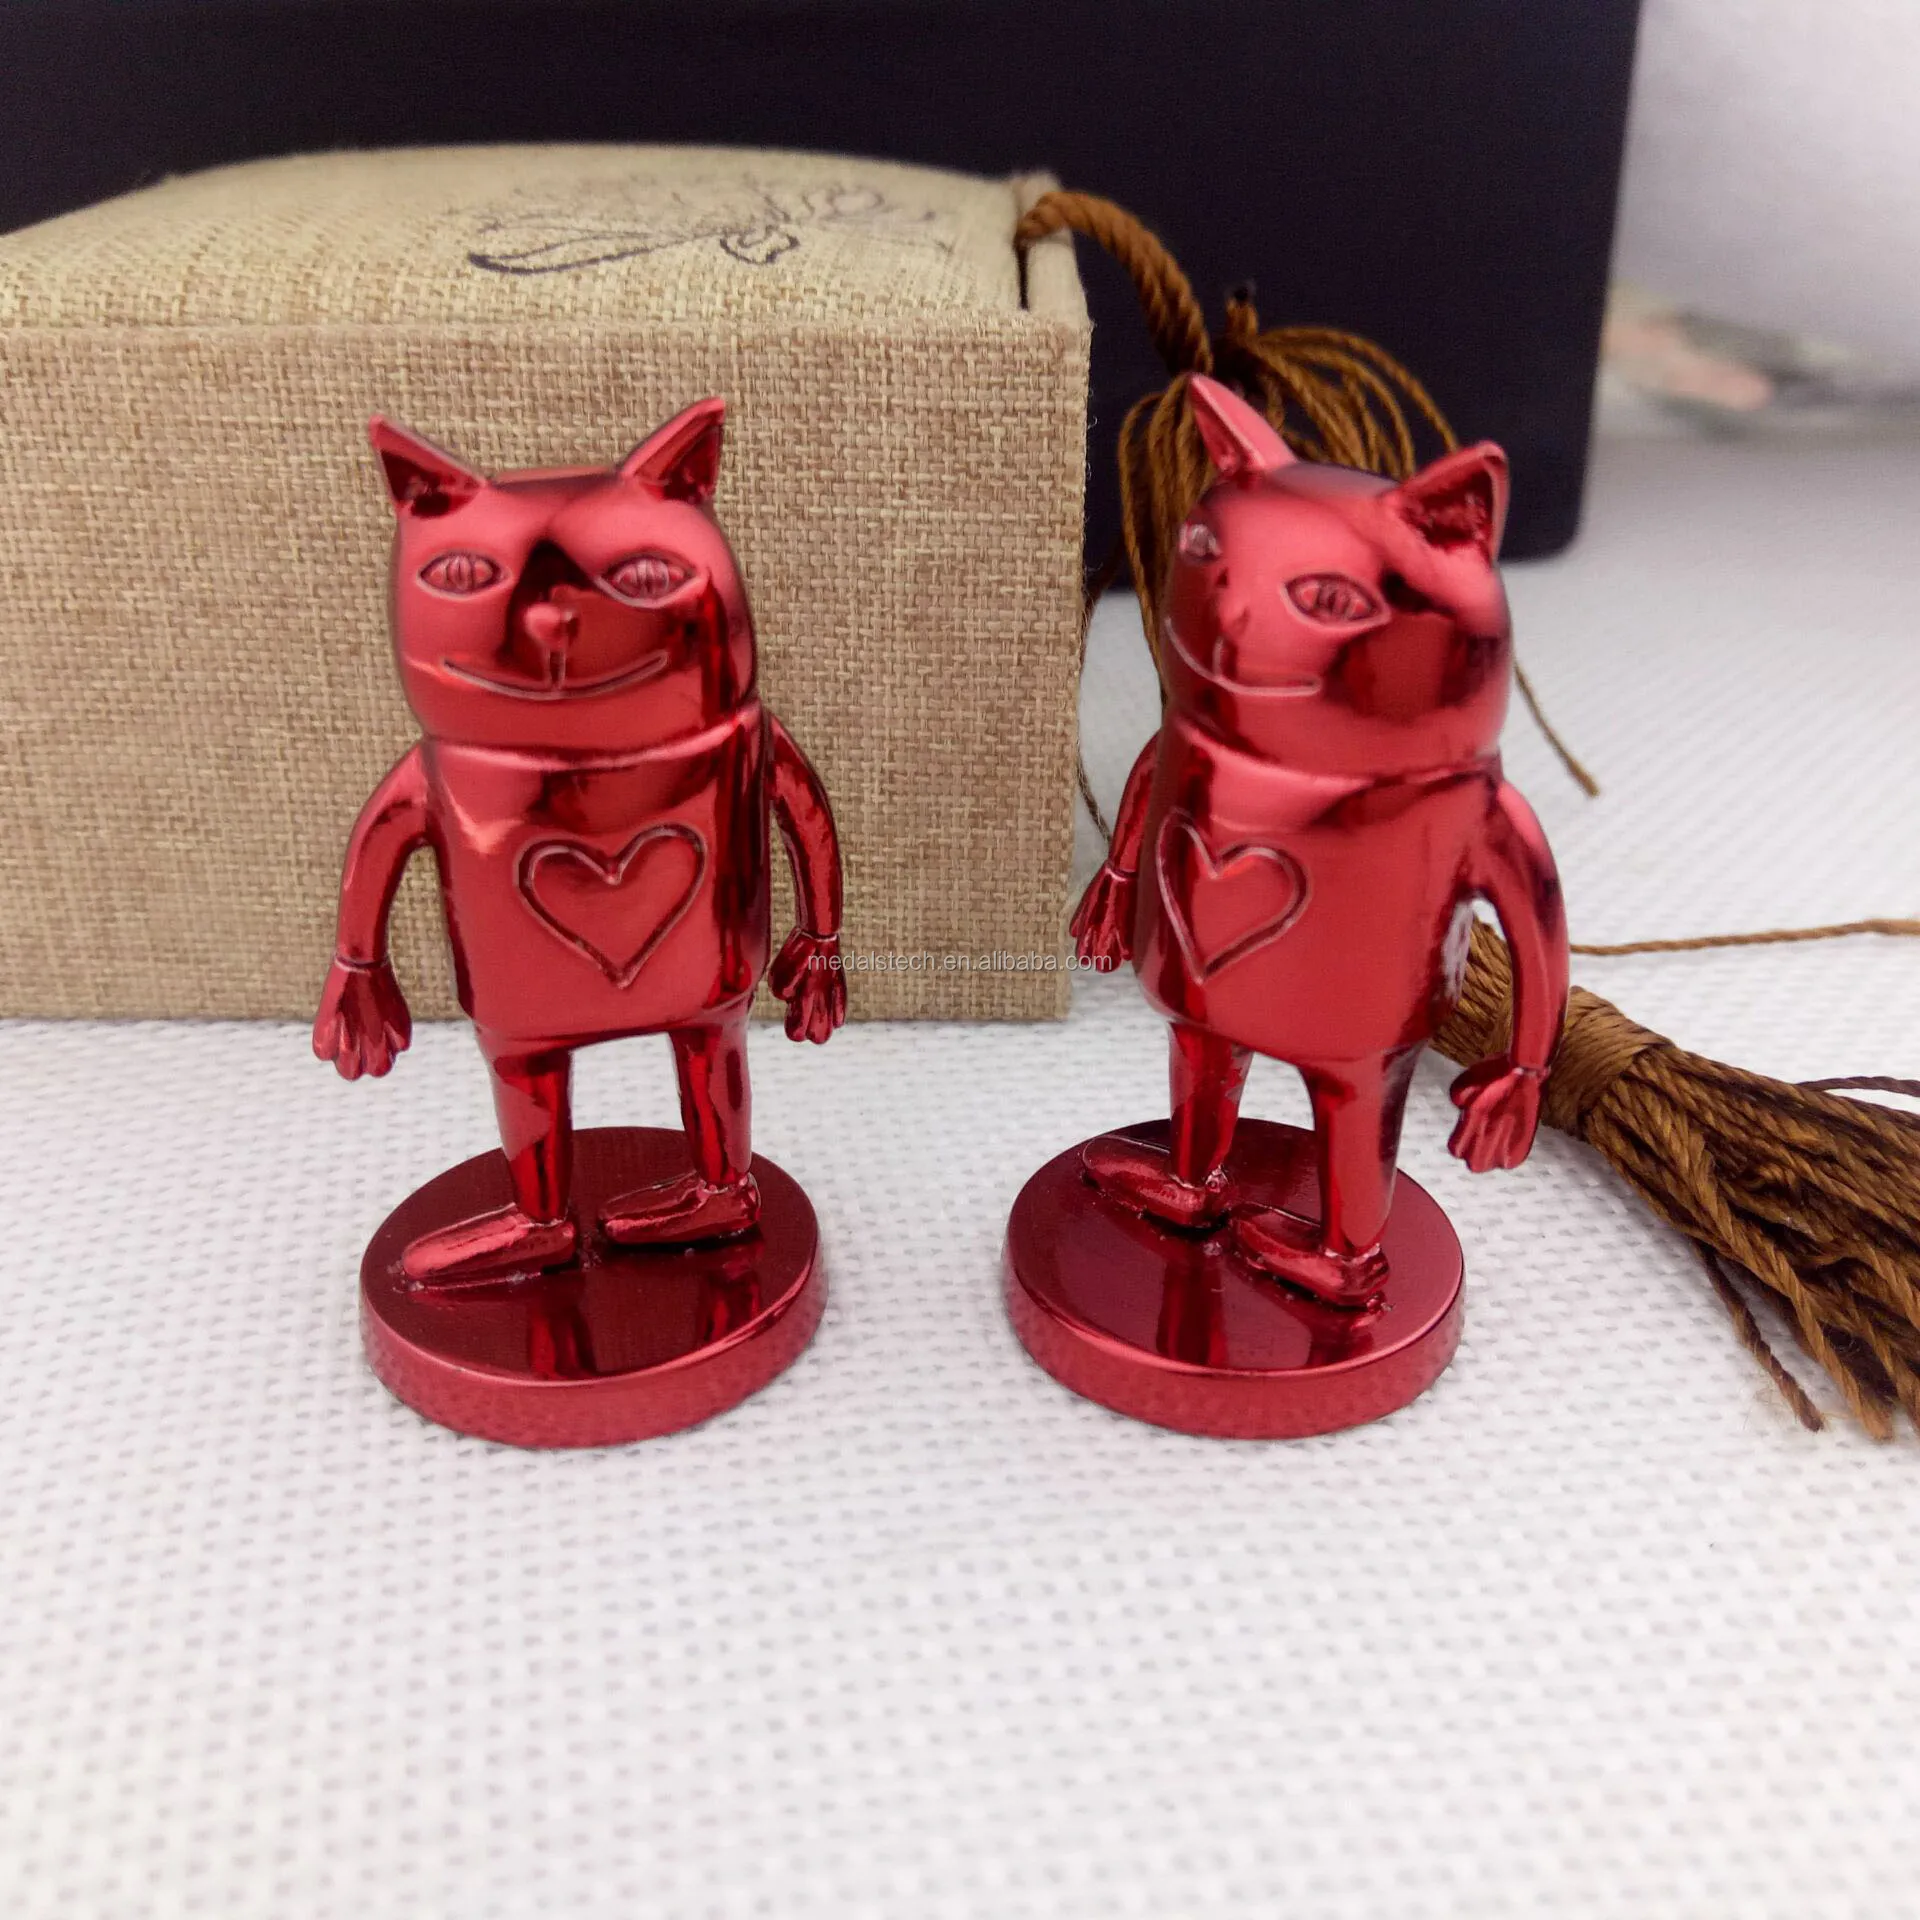 Red plating metal promotional cute action figures for games and movies